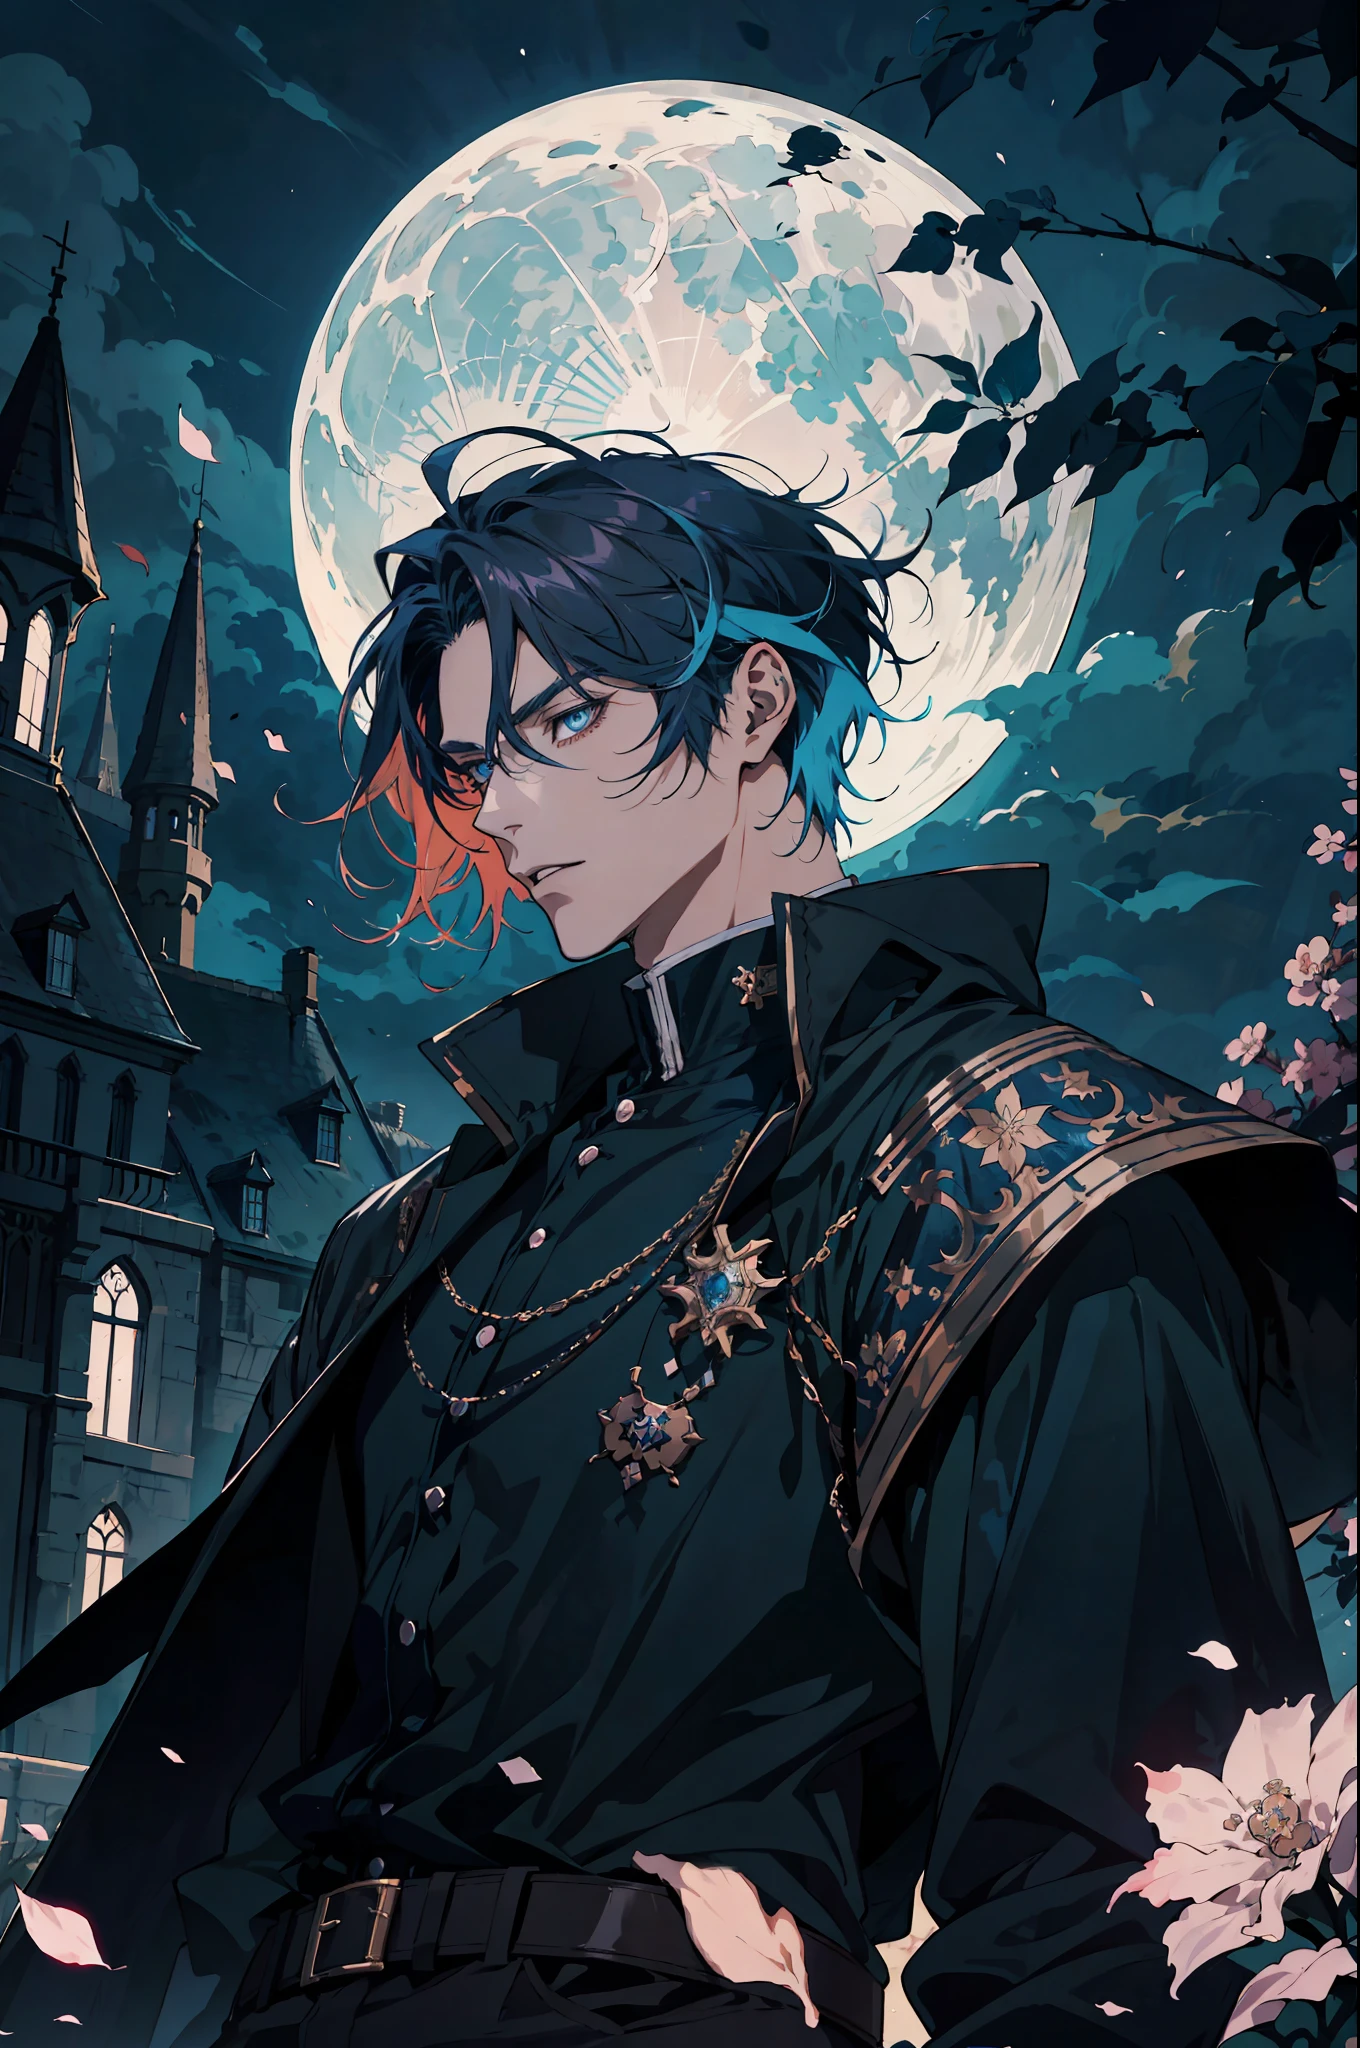 Anime boy with blue hair and blue eyes wearing a blue jacket, Delicate  androgynous prince, young anime man, Beautiful androgynous prince, Anime  portrait of a handsome man - SeaArt AI